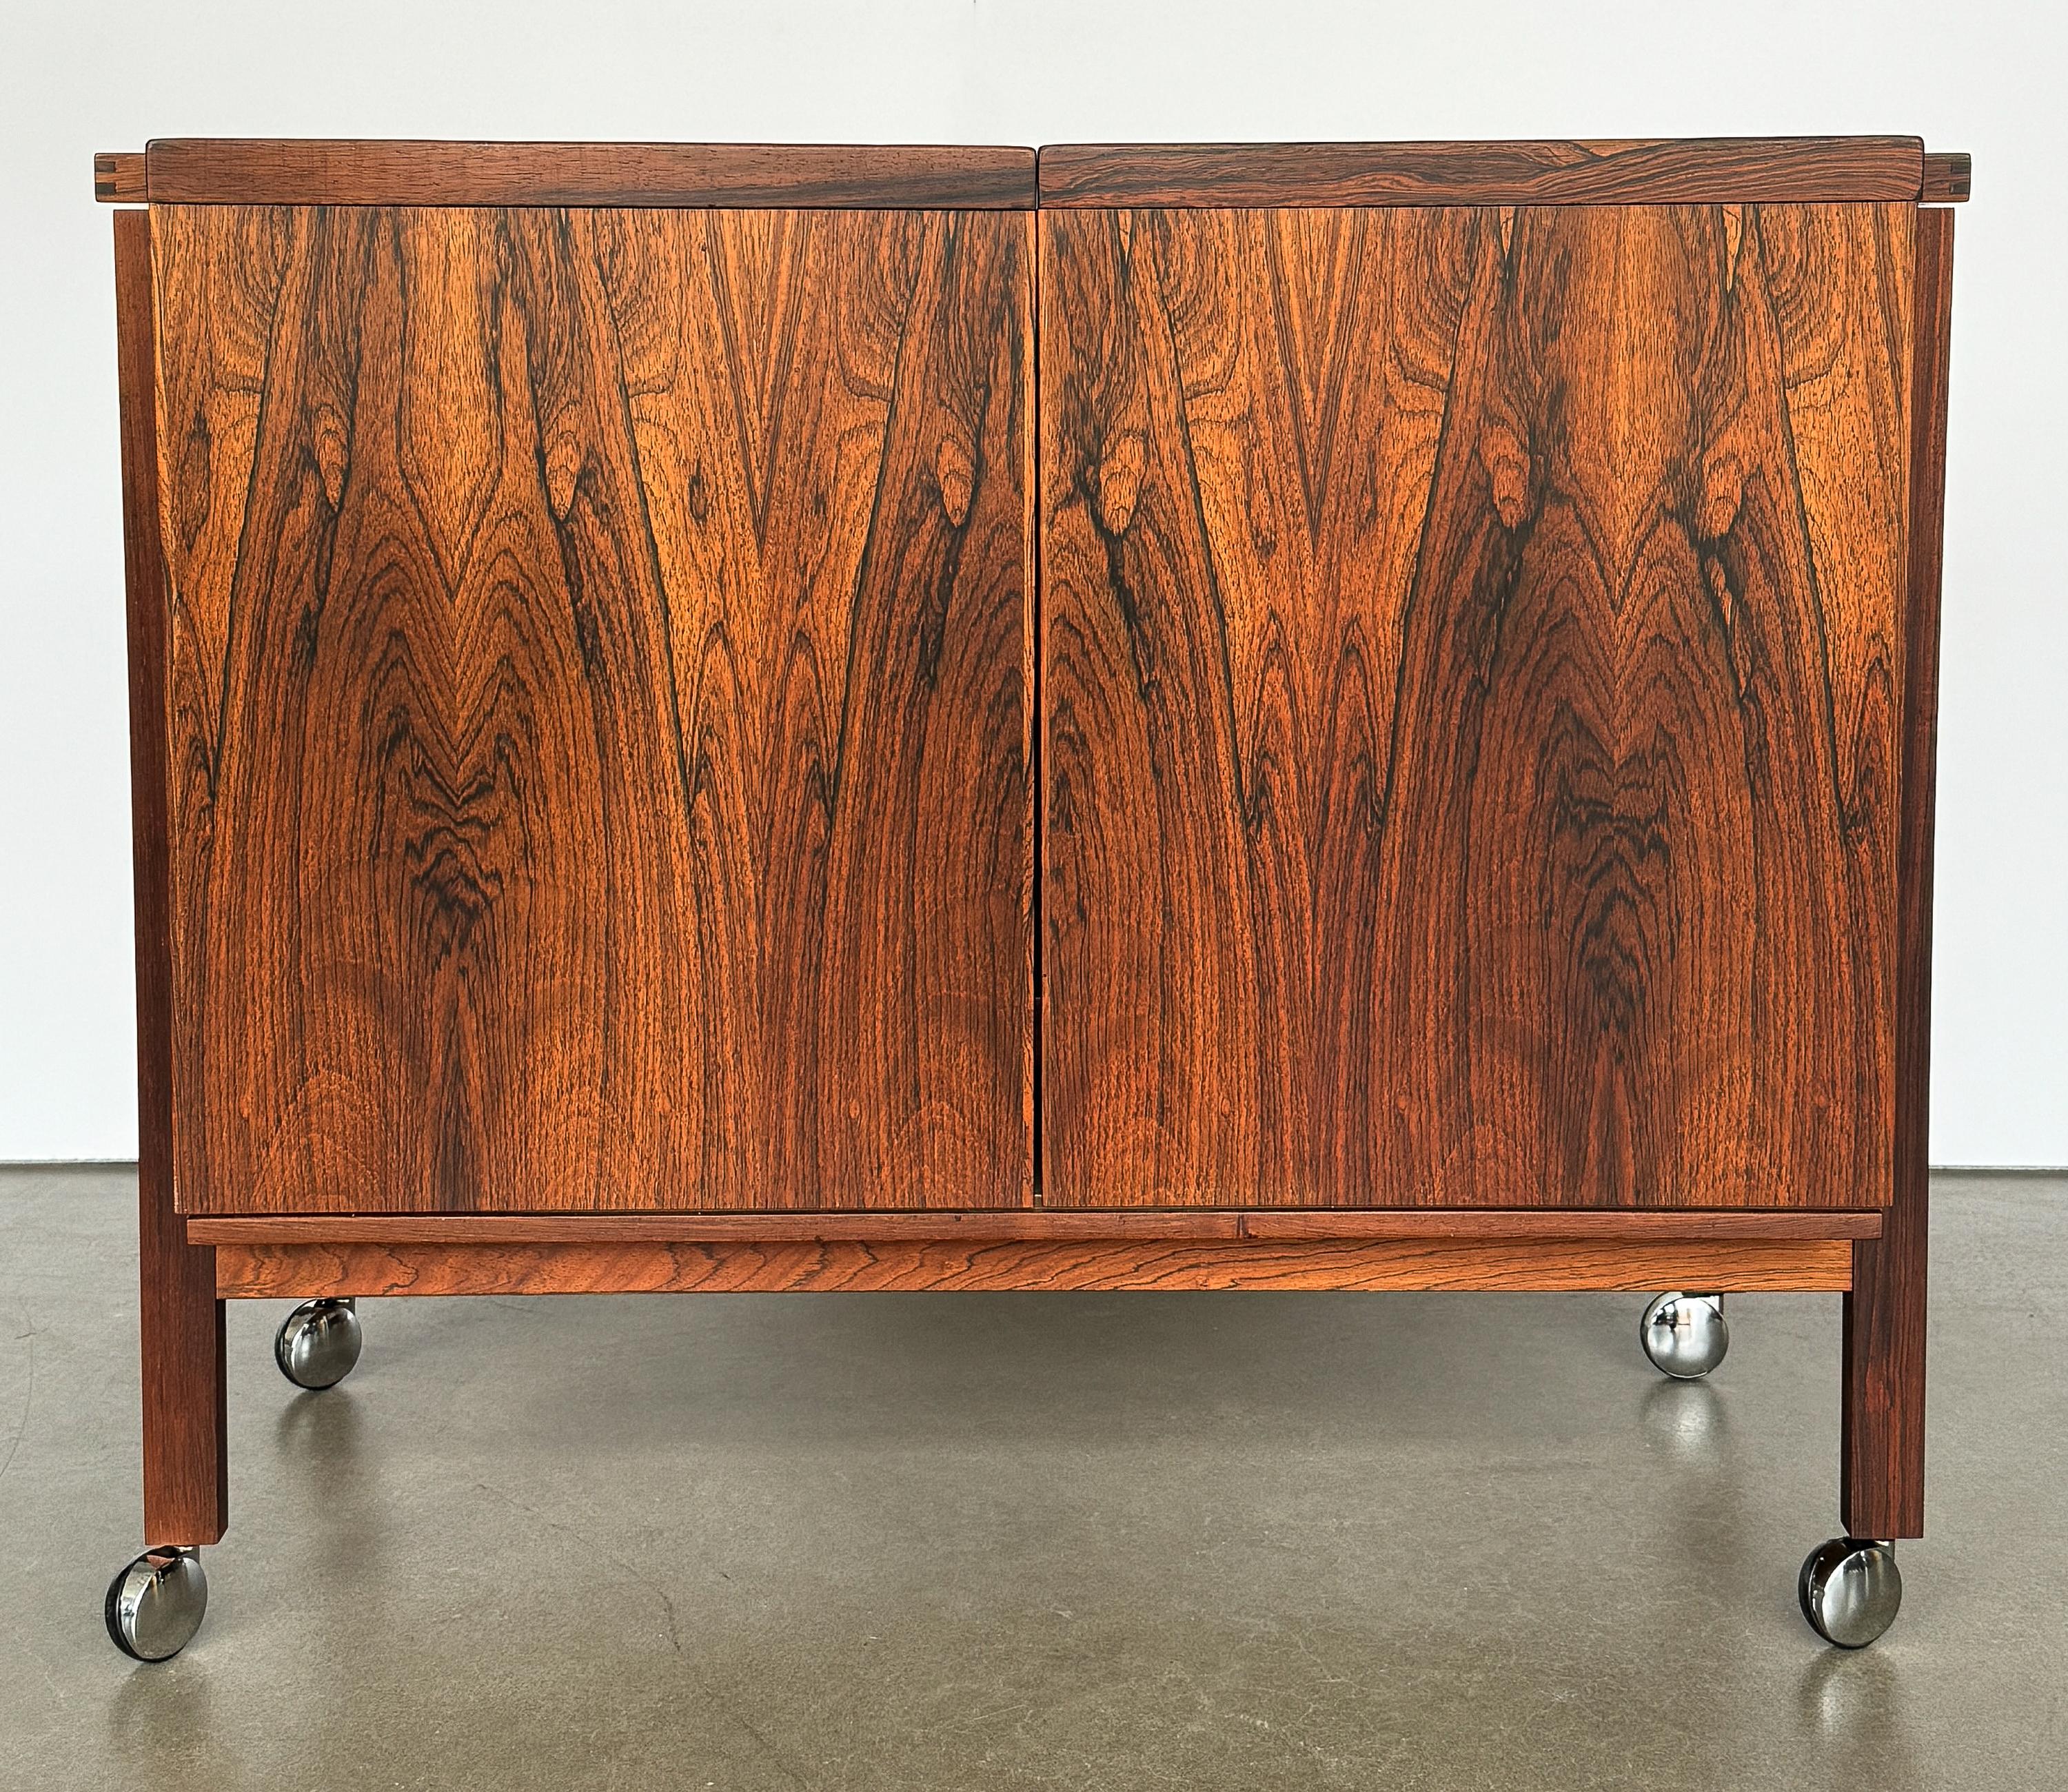 This Danish Mid Century expandable rosewood bar cart / cabinet, designed by Niels Erik and Glasdam Jensen for Vantinge Mobelindustri in the 1960s, is a paragon of Scandinavian design—where functionality meets the pinnacle of style. The beautiful